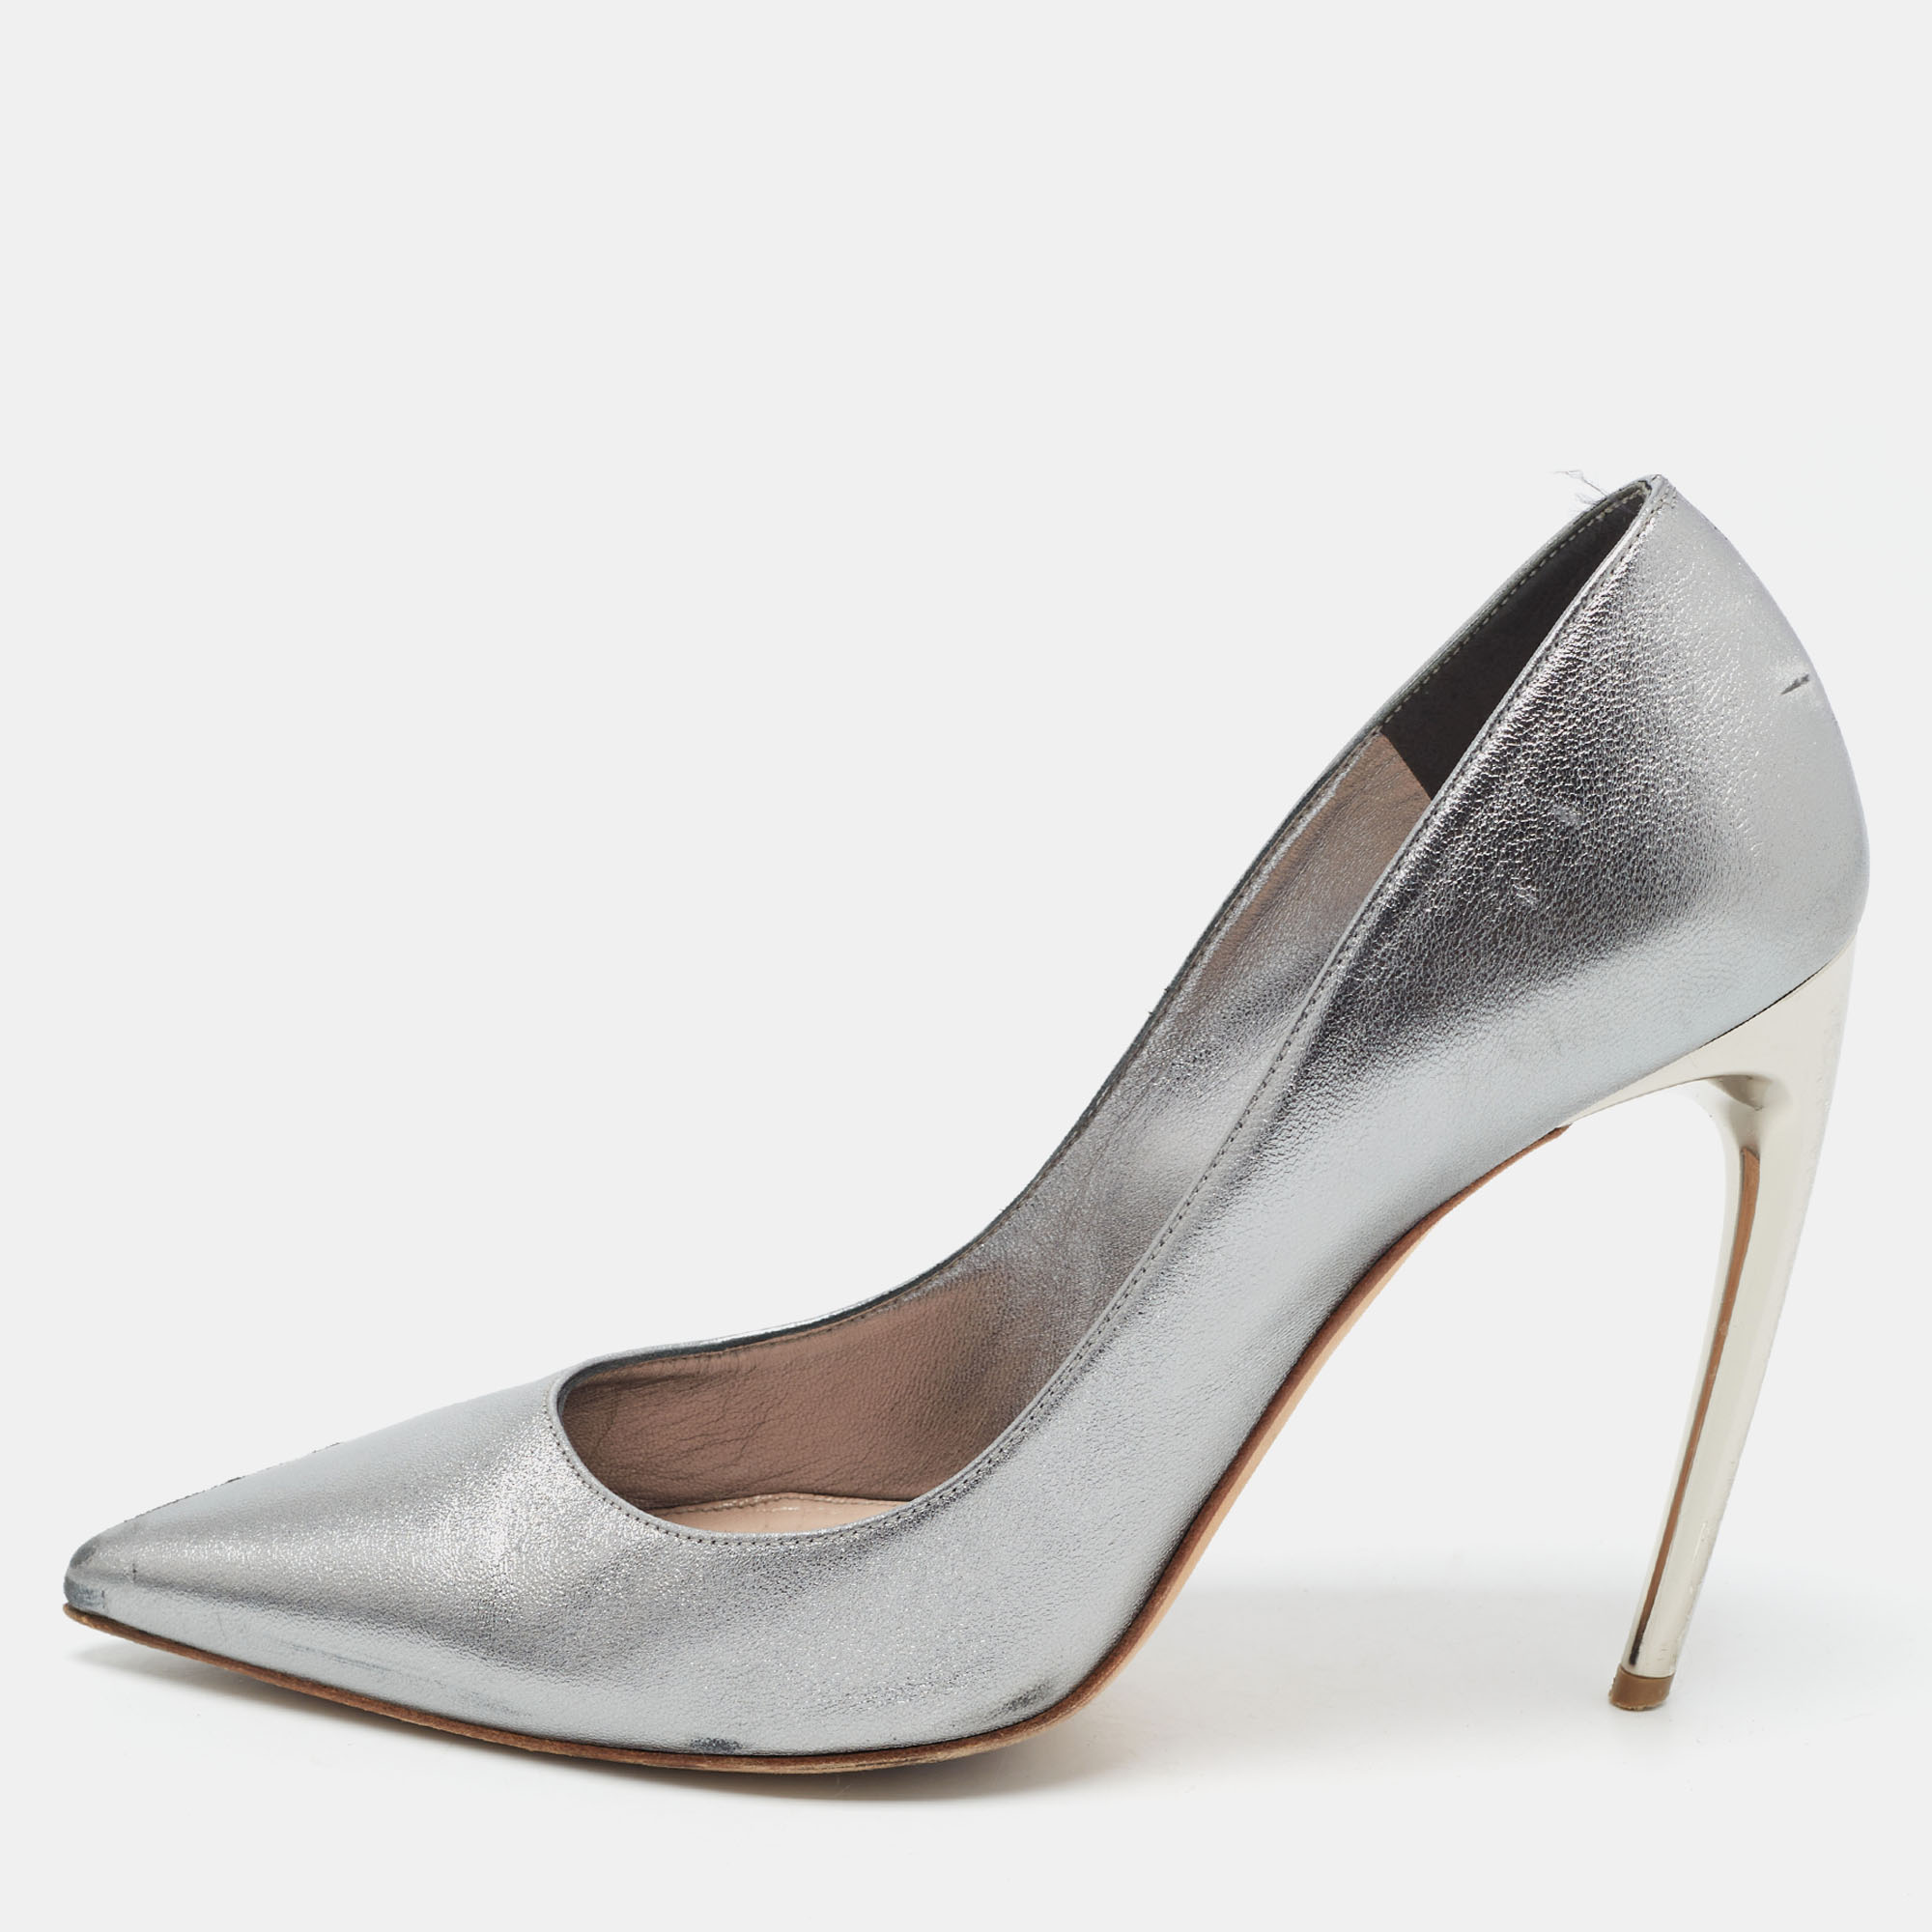 

Alexander McQueen Metallic Leather Pointed Toe Pumps Size